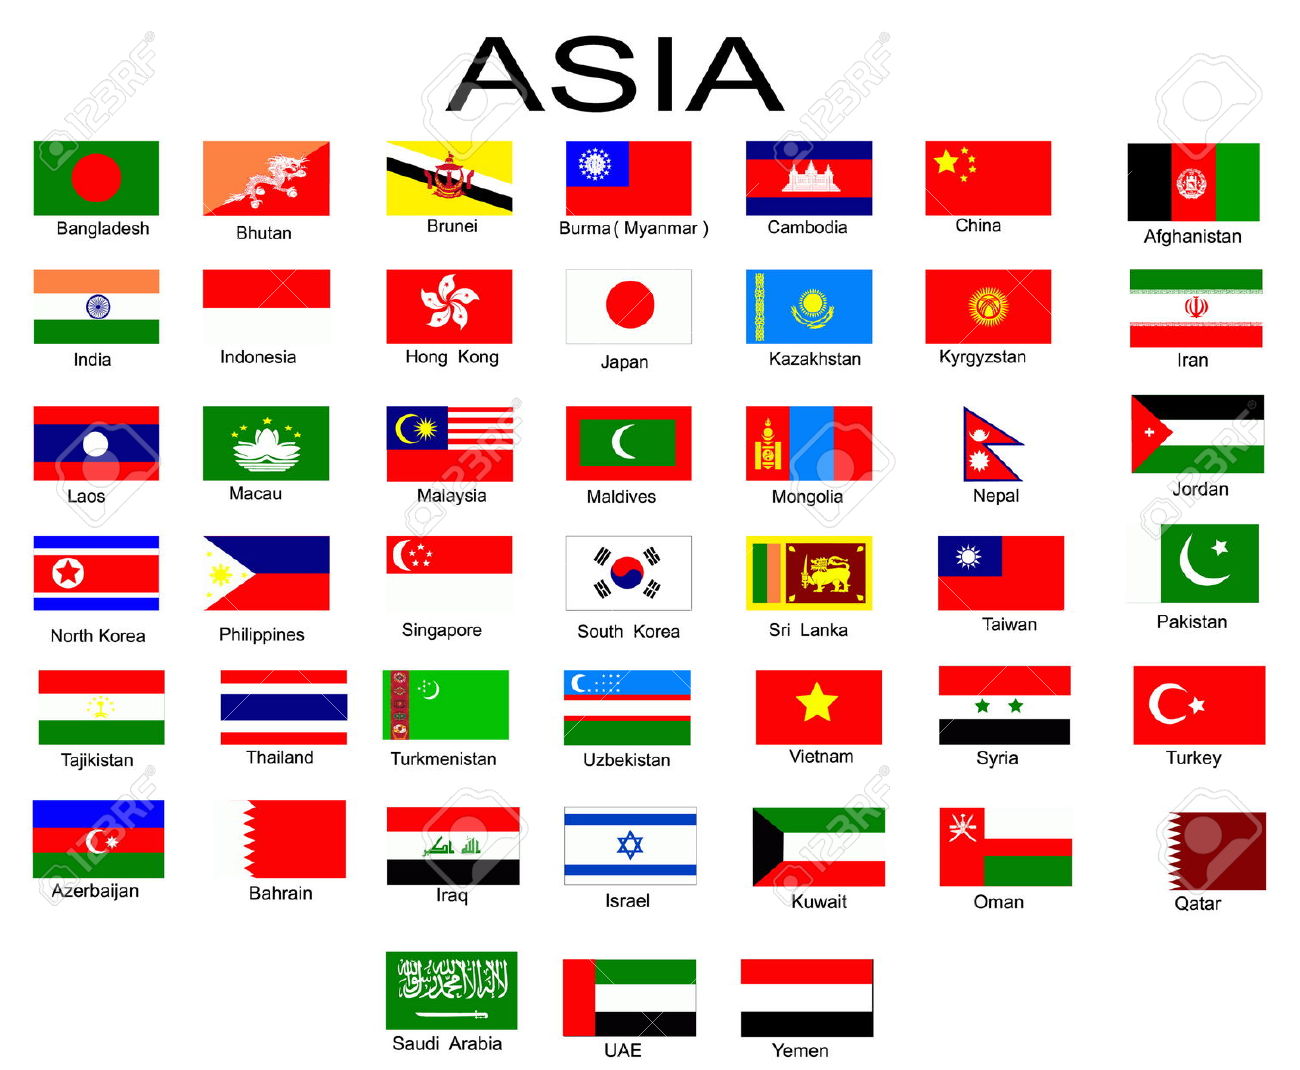 Asia Flags 6383362 List Of All Flags Of Asian Countries Stock Photo Flags Asia LVYZpa 